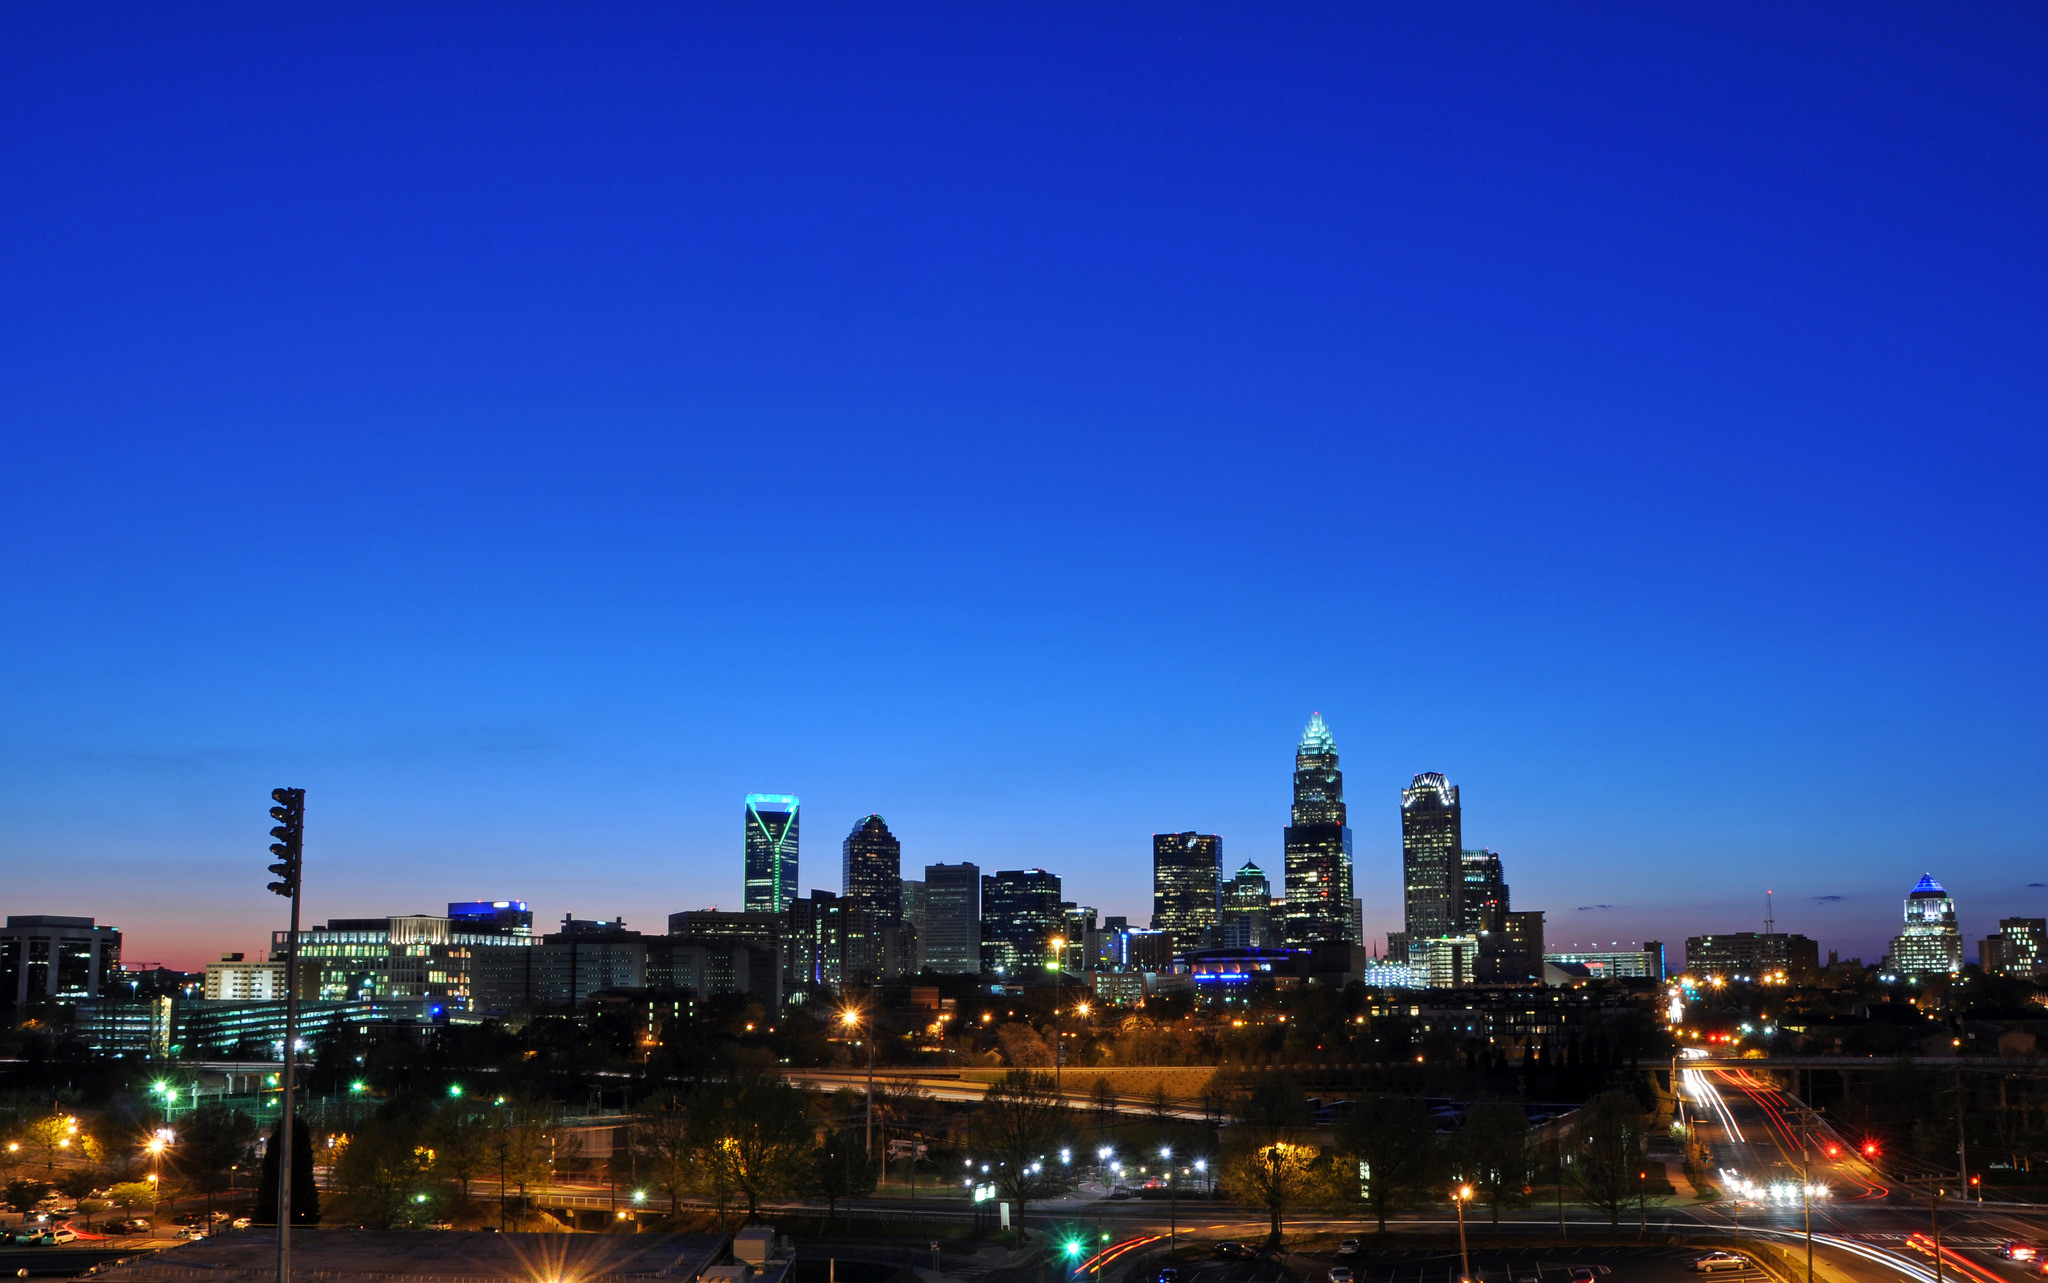 17 Things To Know BEFORE Moving to Charlotte, NC